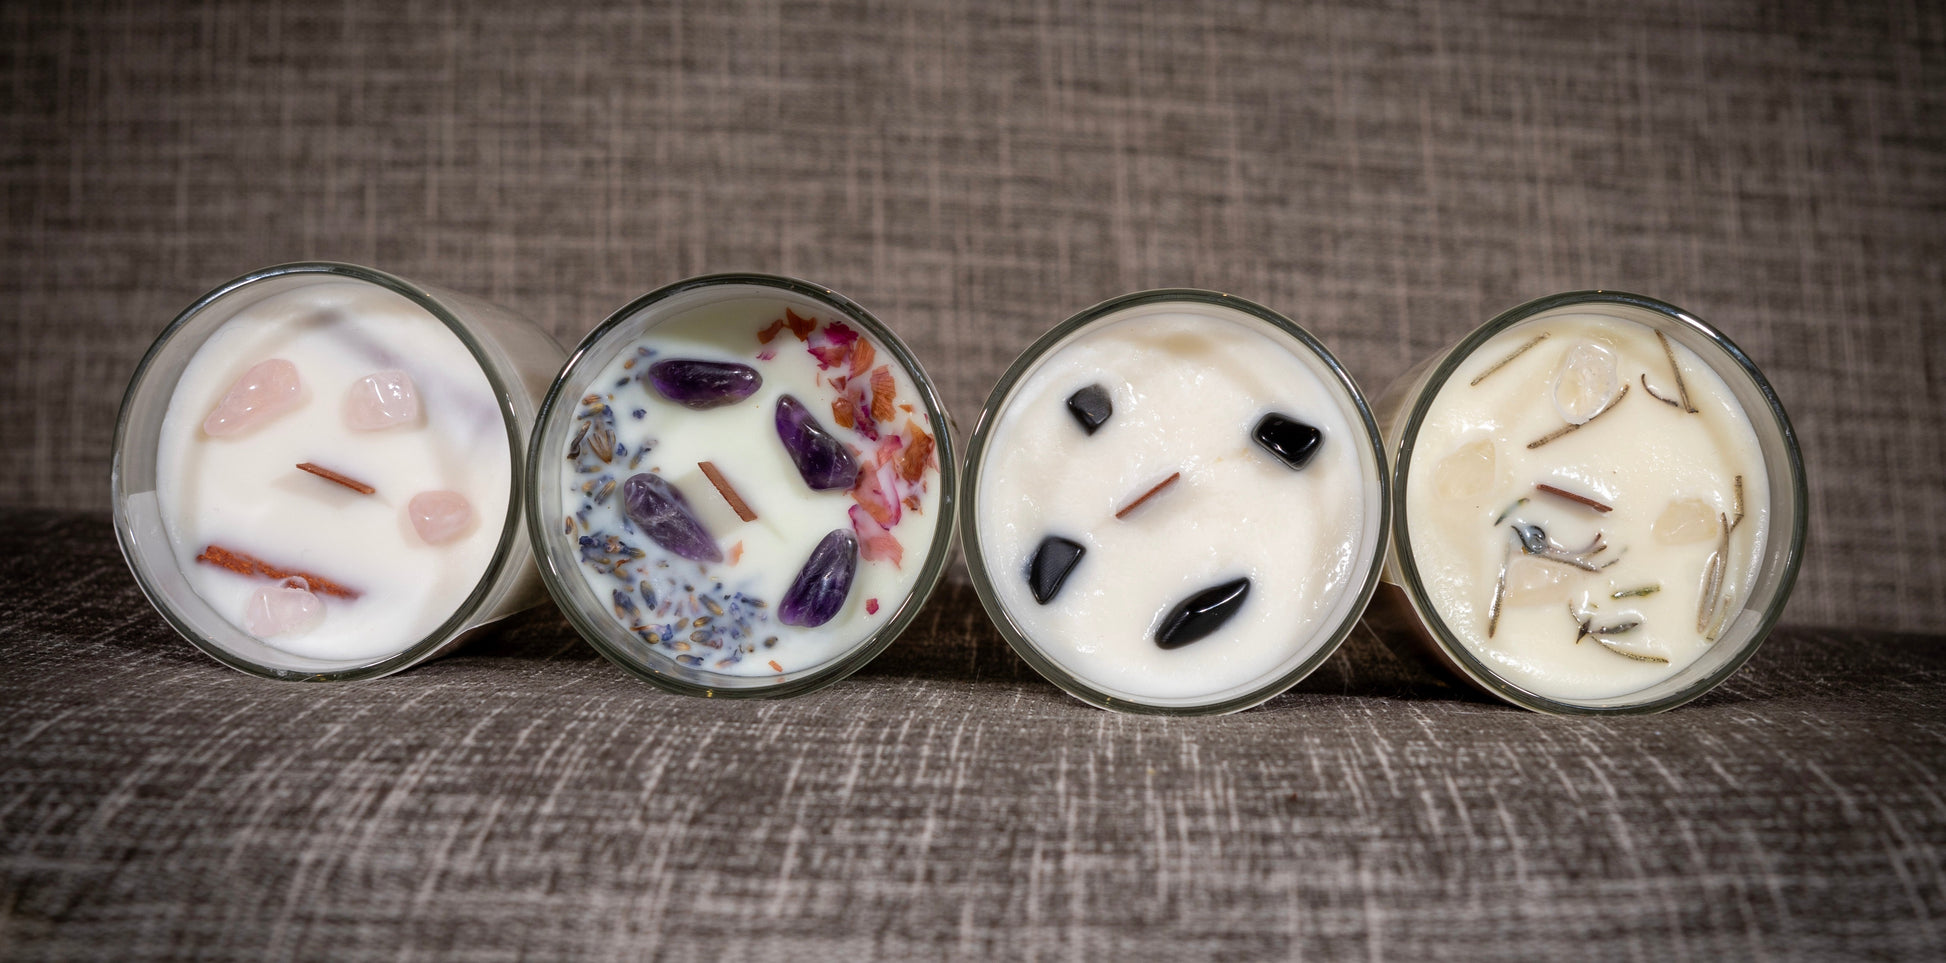 Moon Phases candles, kit with 4 candles. Each candle has crystals for decoration. Waxing Crescent Candle, Full Moon Candle, New Moon Candle and Waning Crescent Candle